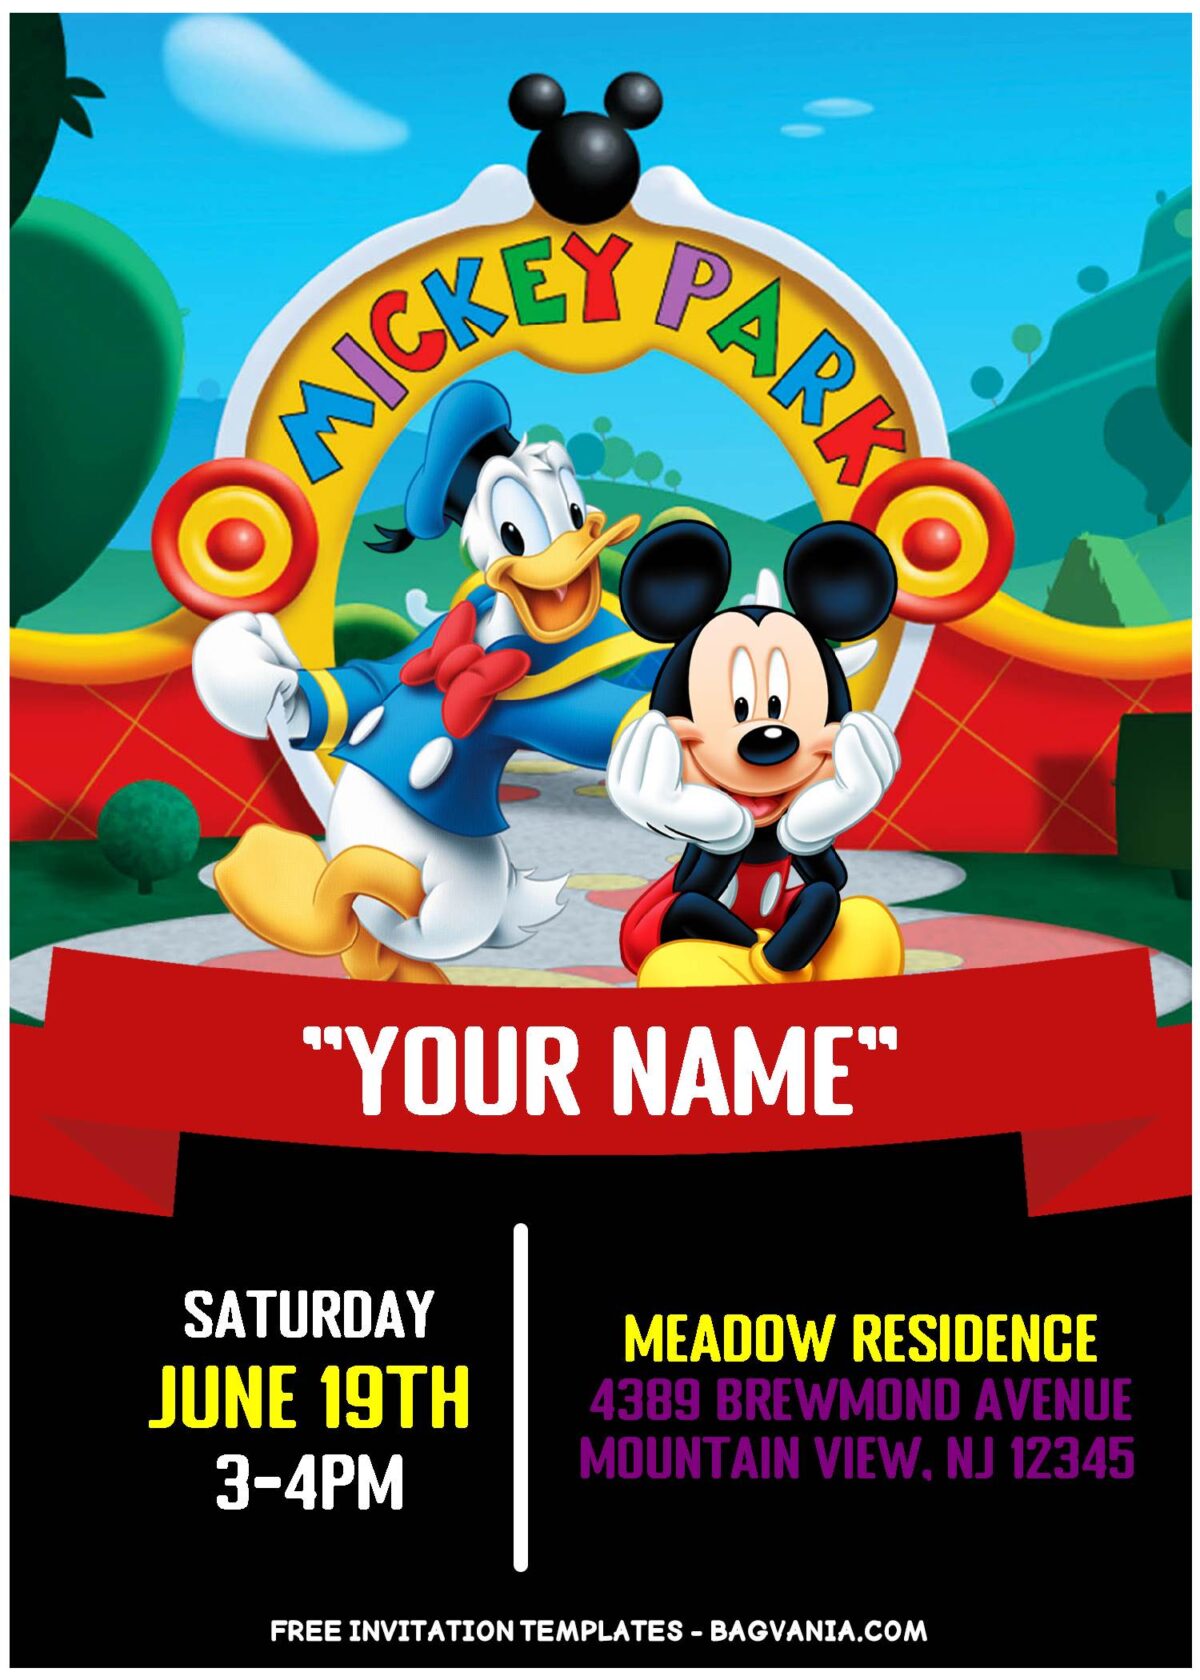 (Free Editable PDF) Adorable Mickey Park Birthday Invitation Templates with Donald duck and Mickey Mouse